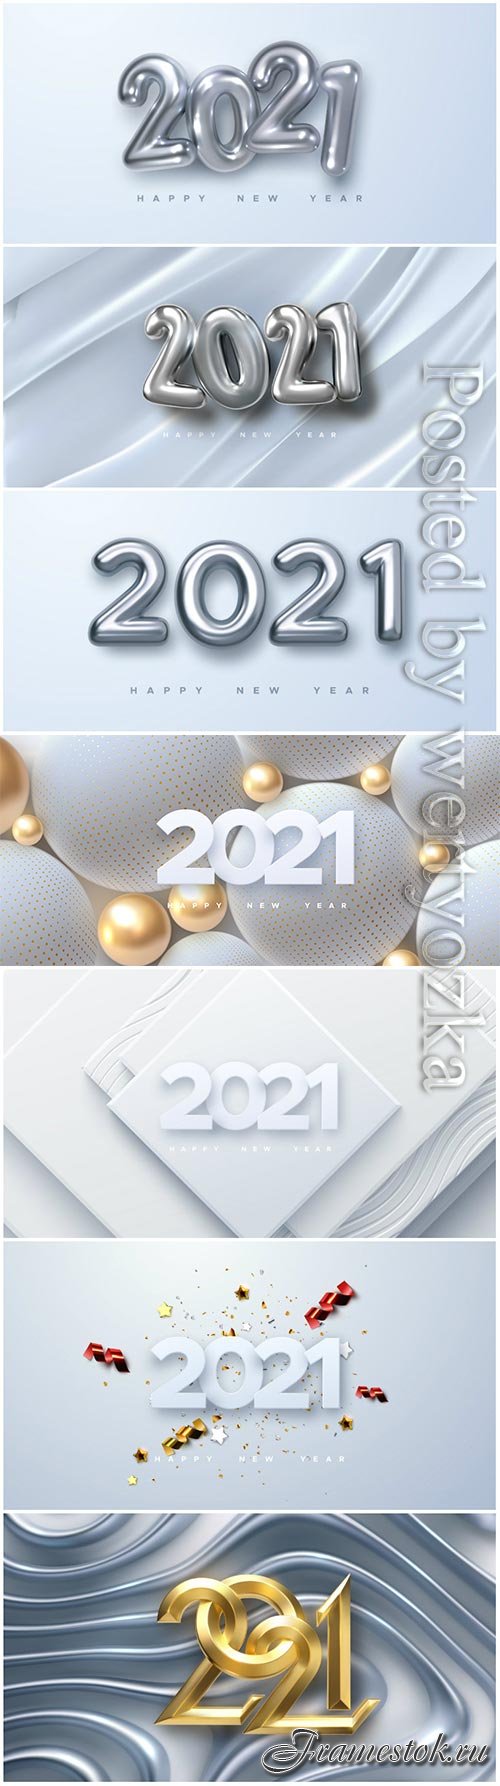 Elegant vector numbers 2021 for new year illustration